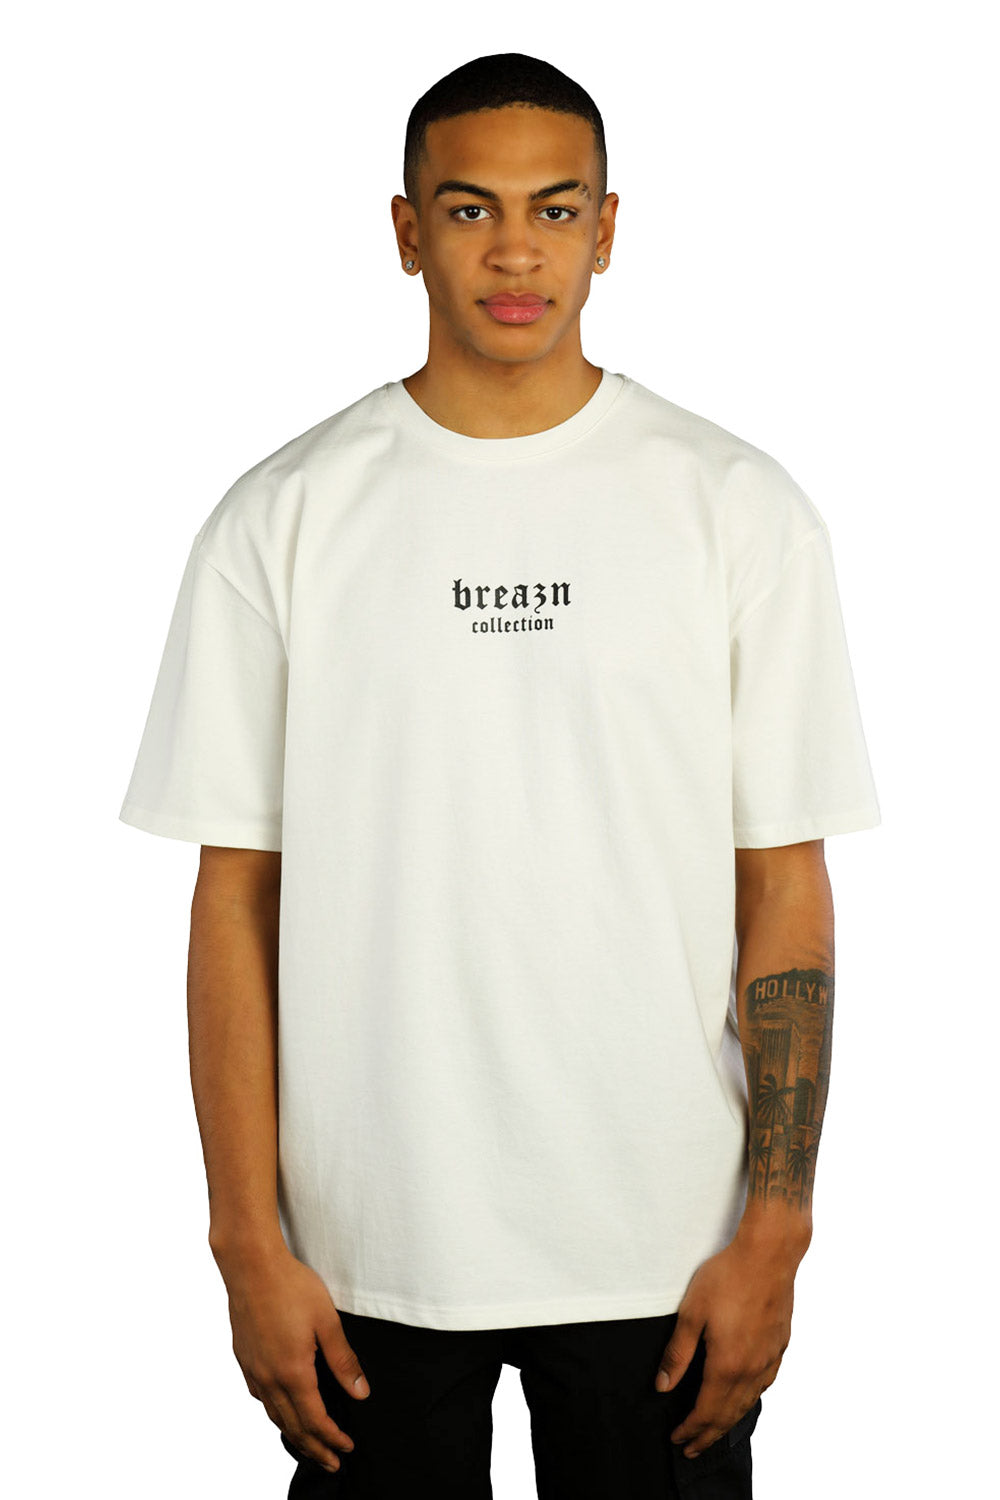 Front – Print T-Shirt Collection Breazn (white)